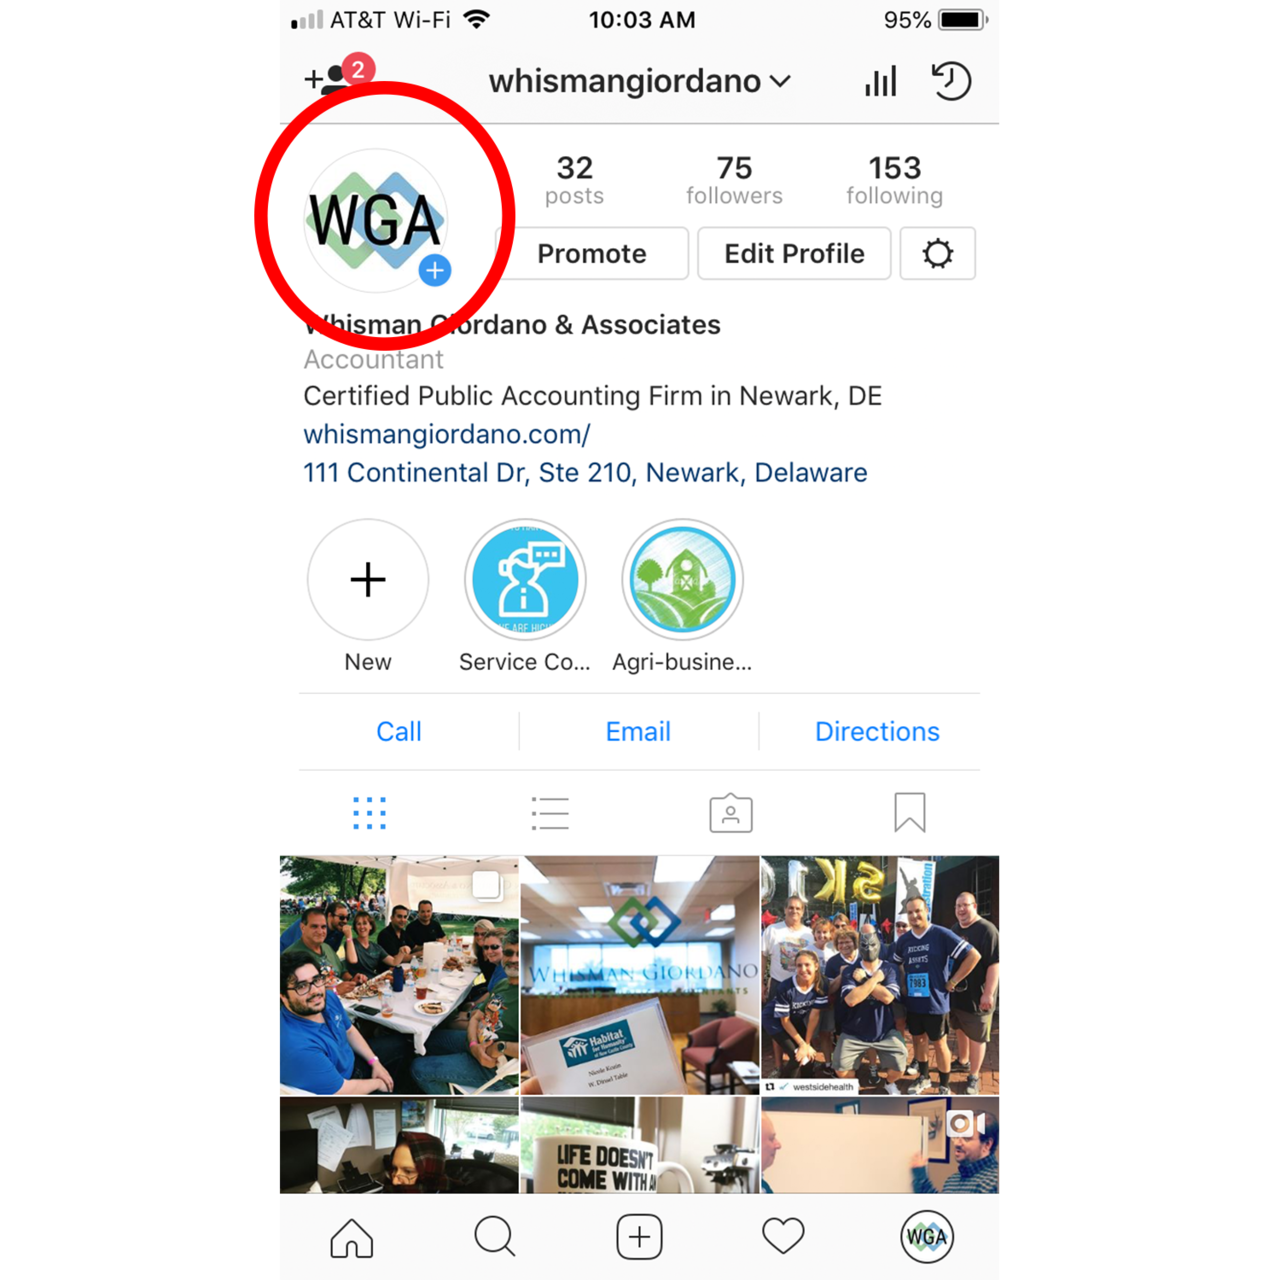 that is your instagram icon this icon should include a clear picture of your company symbol or logo so when people come to your page they have an idea - what order is instagra!   m following in